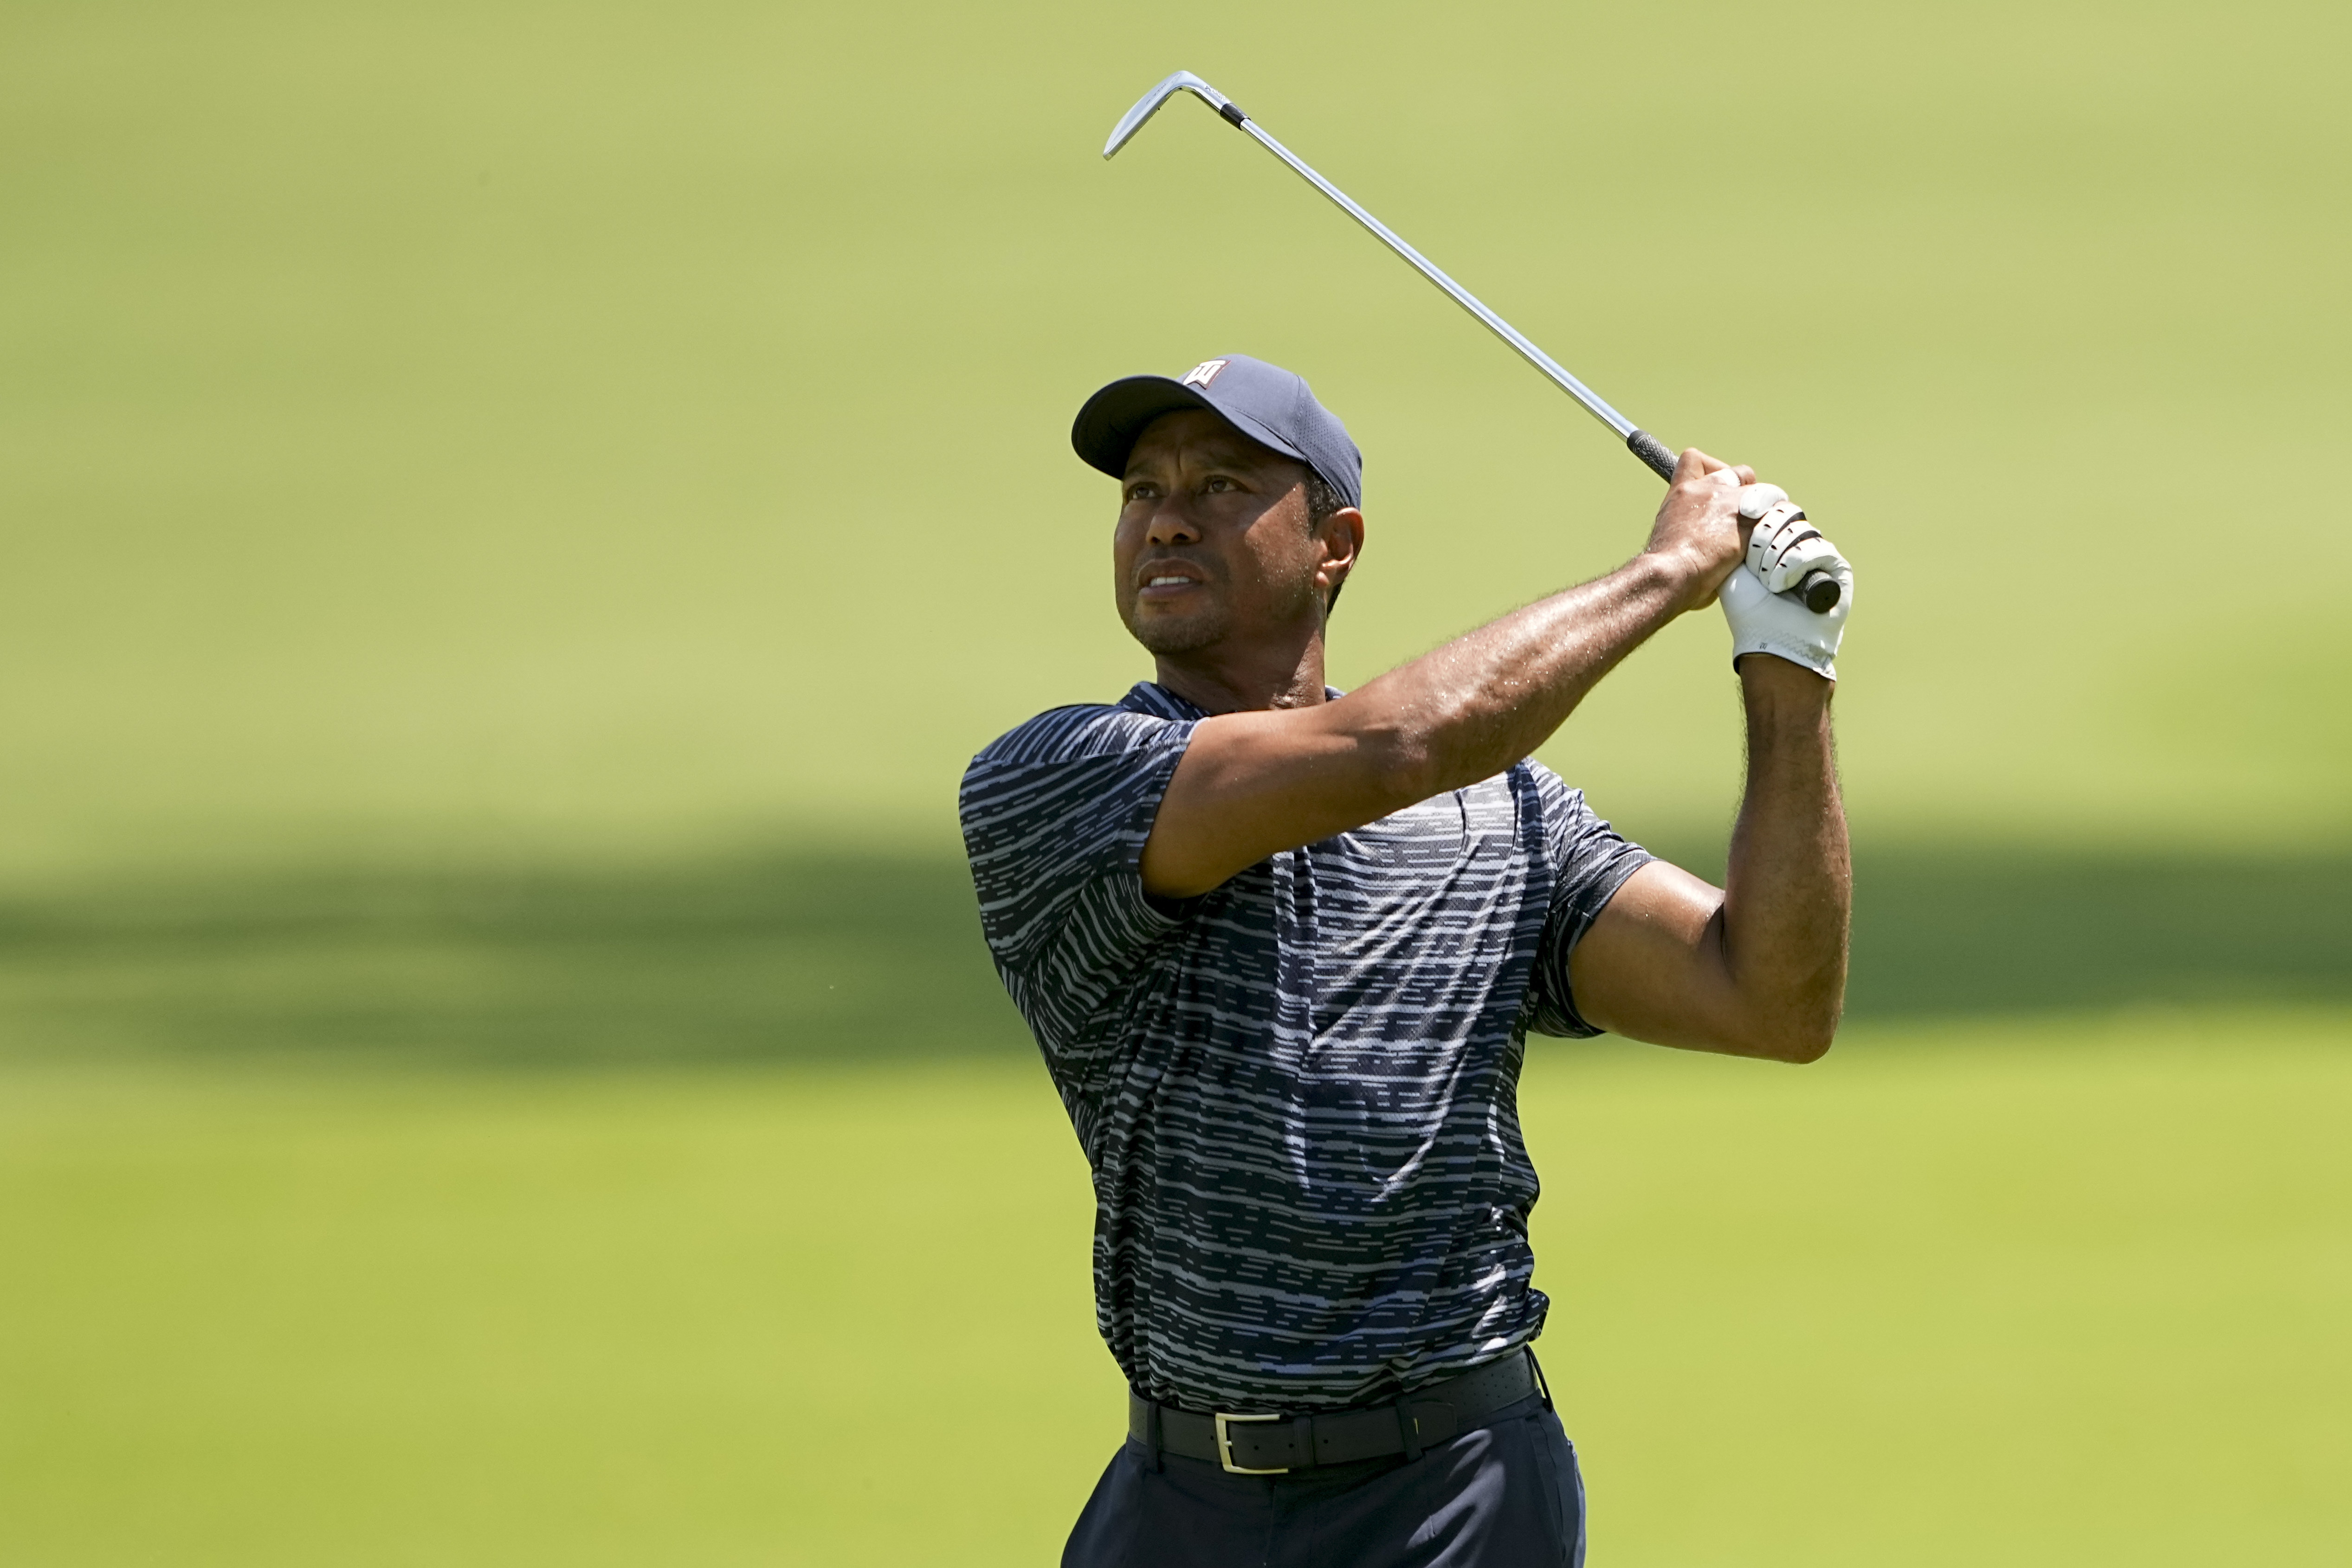 PGA Championship Round 3 live stream (5/21) How to watch online, TV, time, Tiger Woods tee time